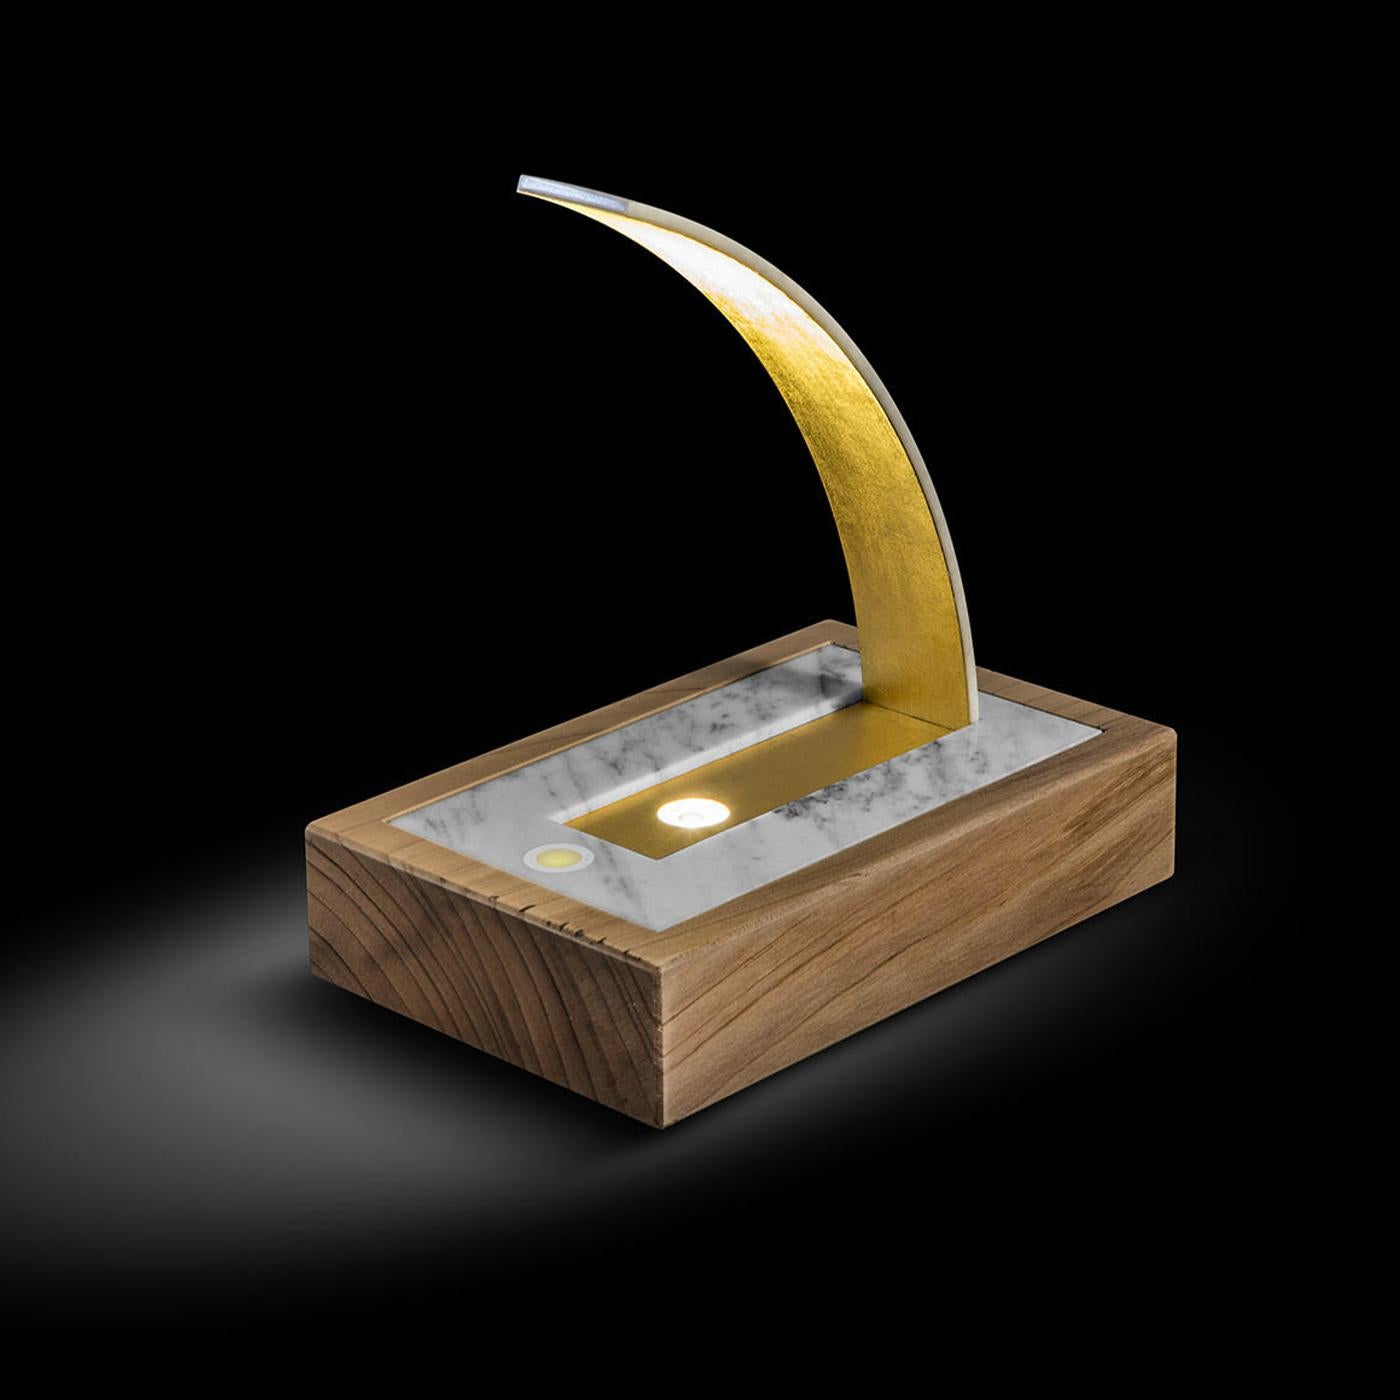 This table lamp is characterized by a sculptural silhouette composed of an elegant combination of refined materials. The rectangular base is composed of an external frame made of solid Lebanon cedar wood and an internal base made of Carrara Gold